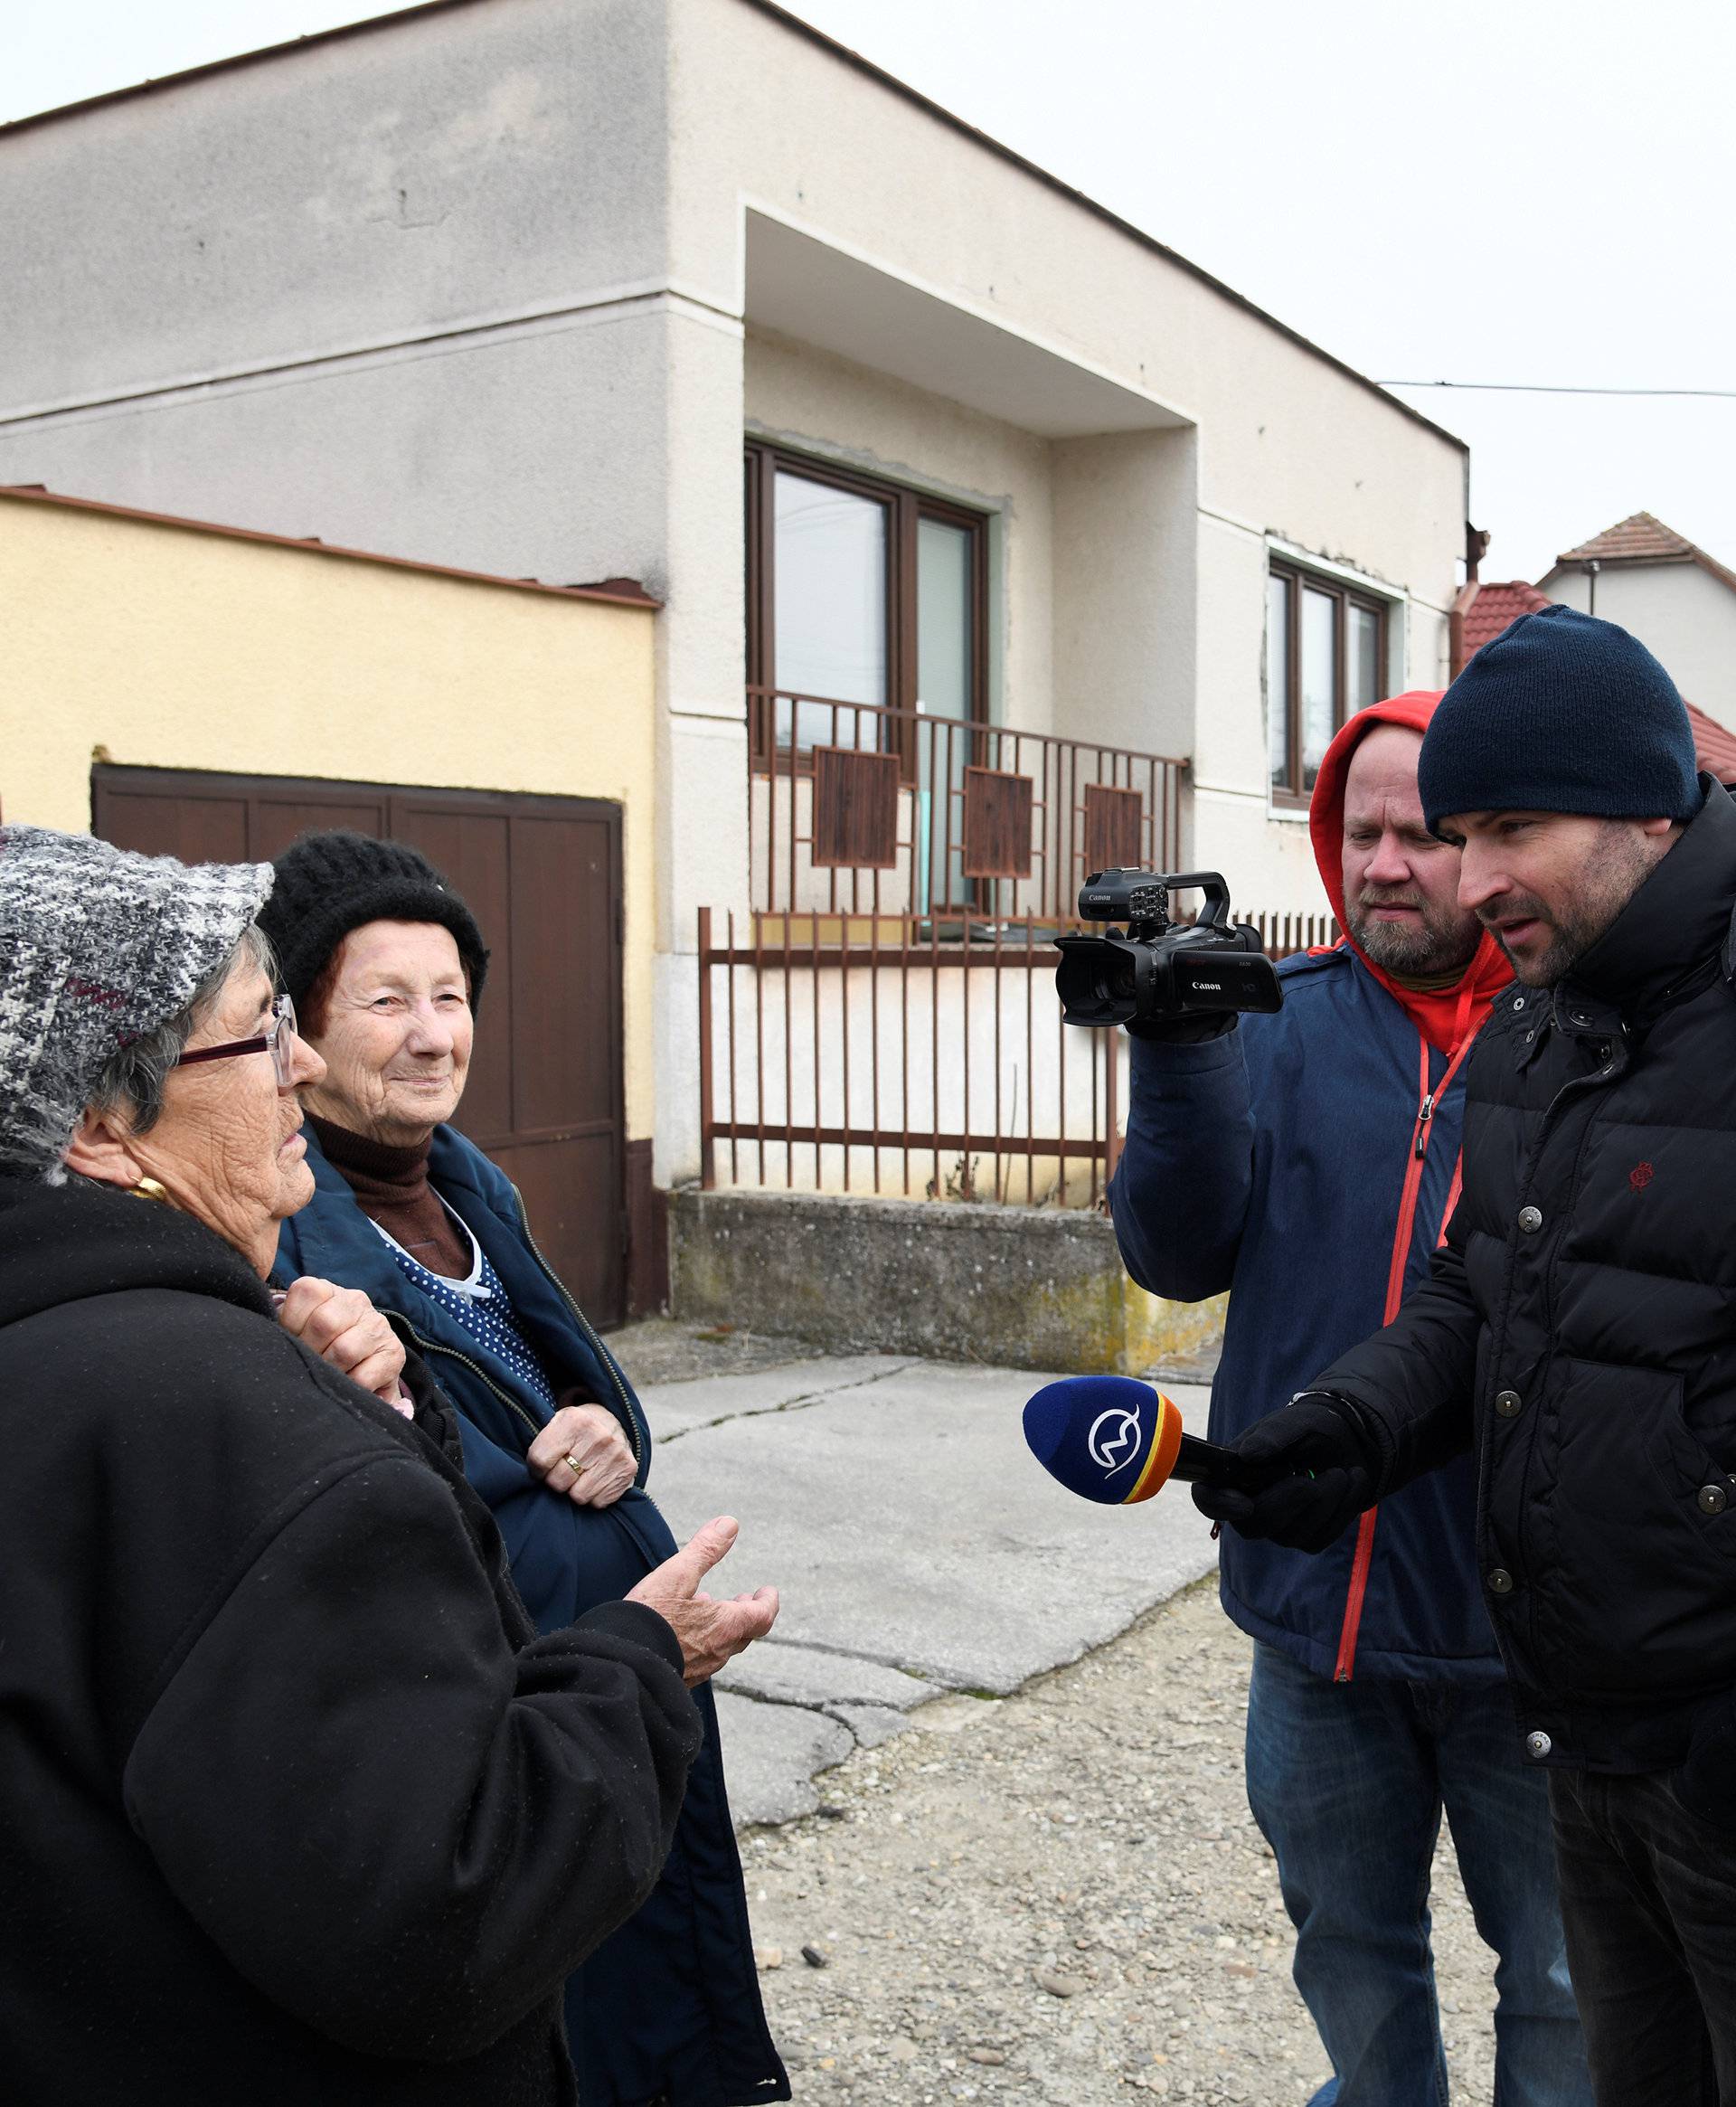 Neighbours Anna (L) and Maria speak to the media near to the house where Slovak investigative journalist Jan Kuciak and his girlfriend Martina Kusnirova lived and were murdered in the village of Velka Maca